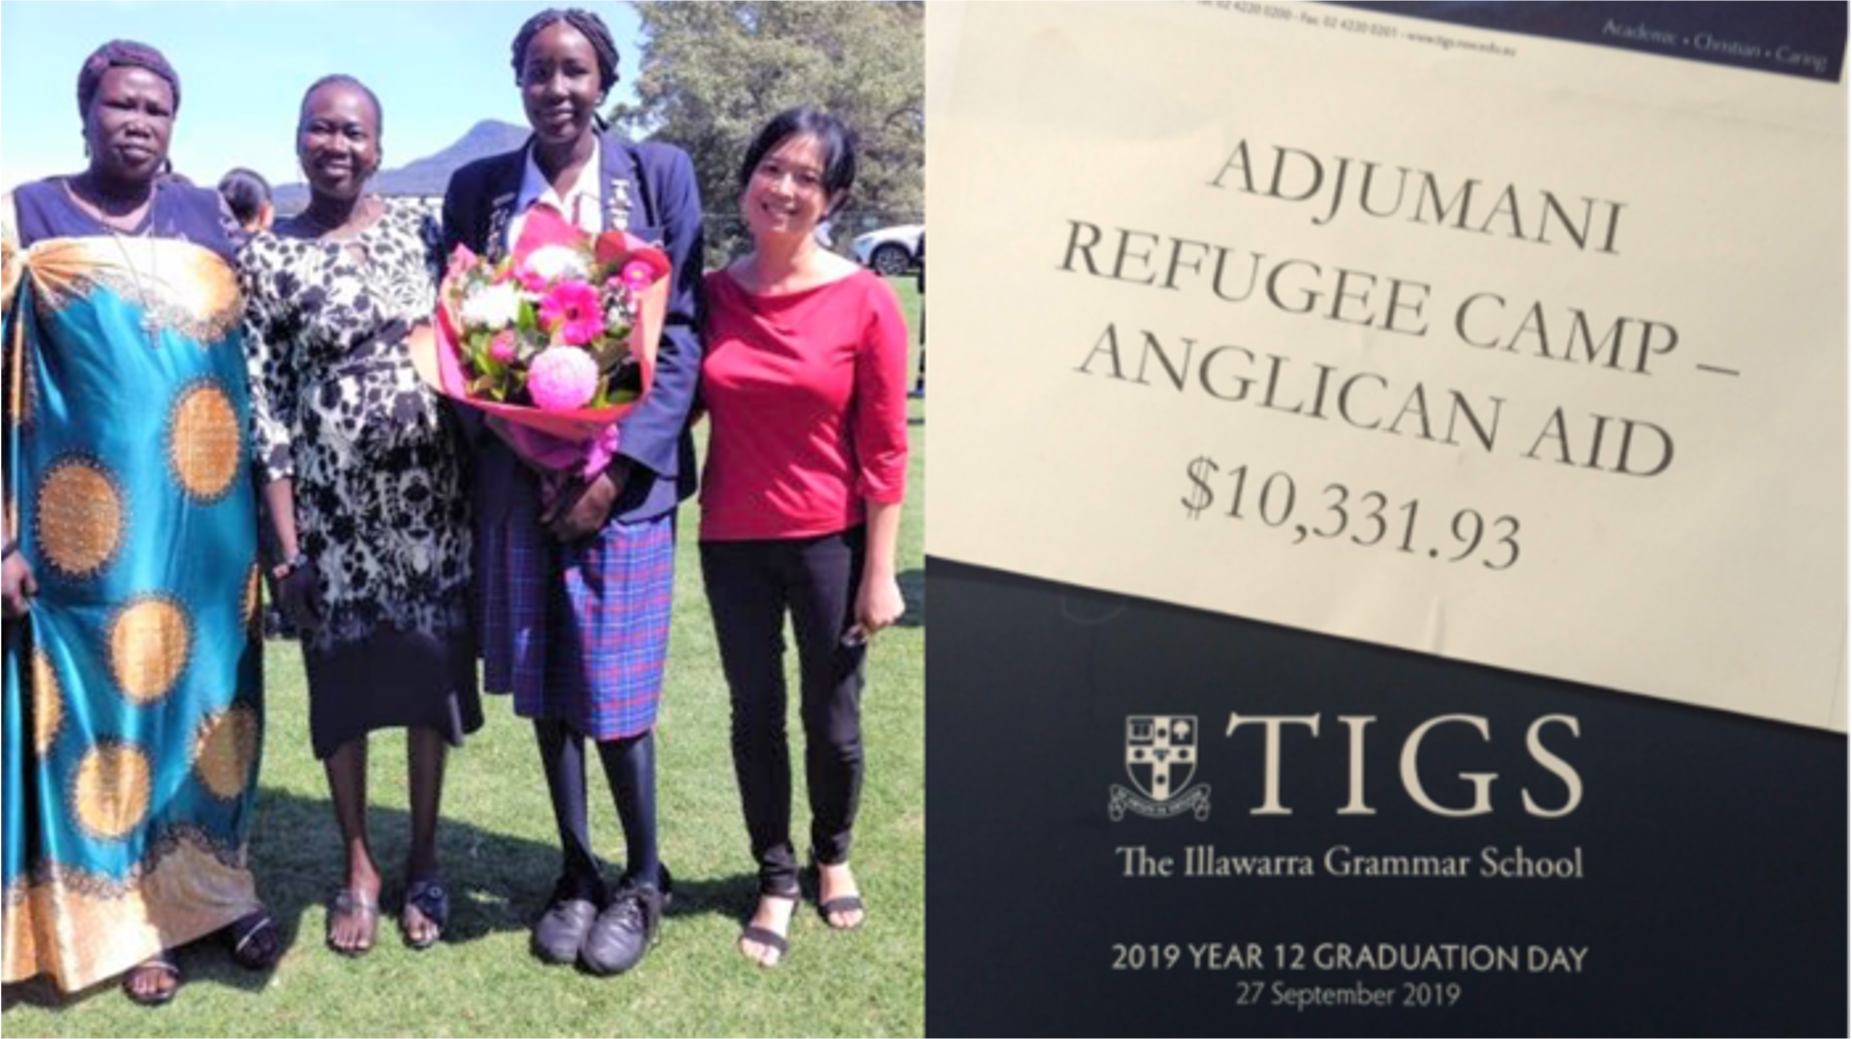 Elizabeth, youngest daughter and Anglican Aid worker receiving the donation by The Illawarra Grammar School in Wollongong